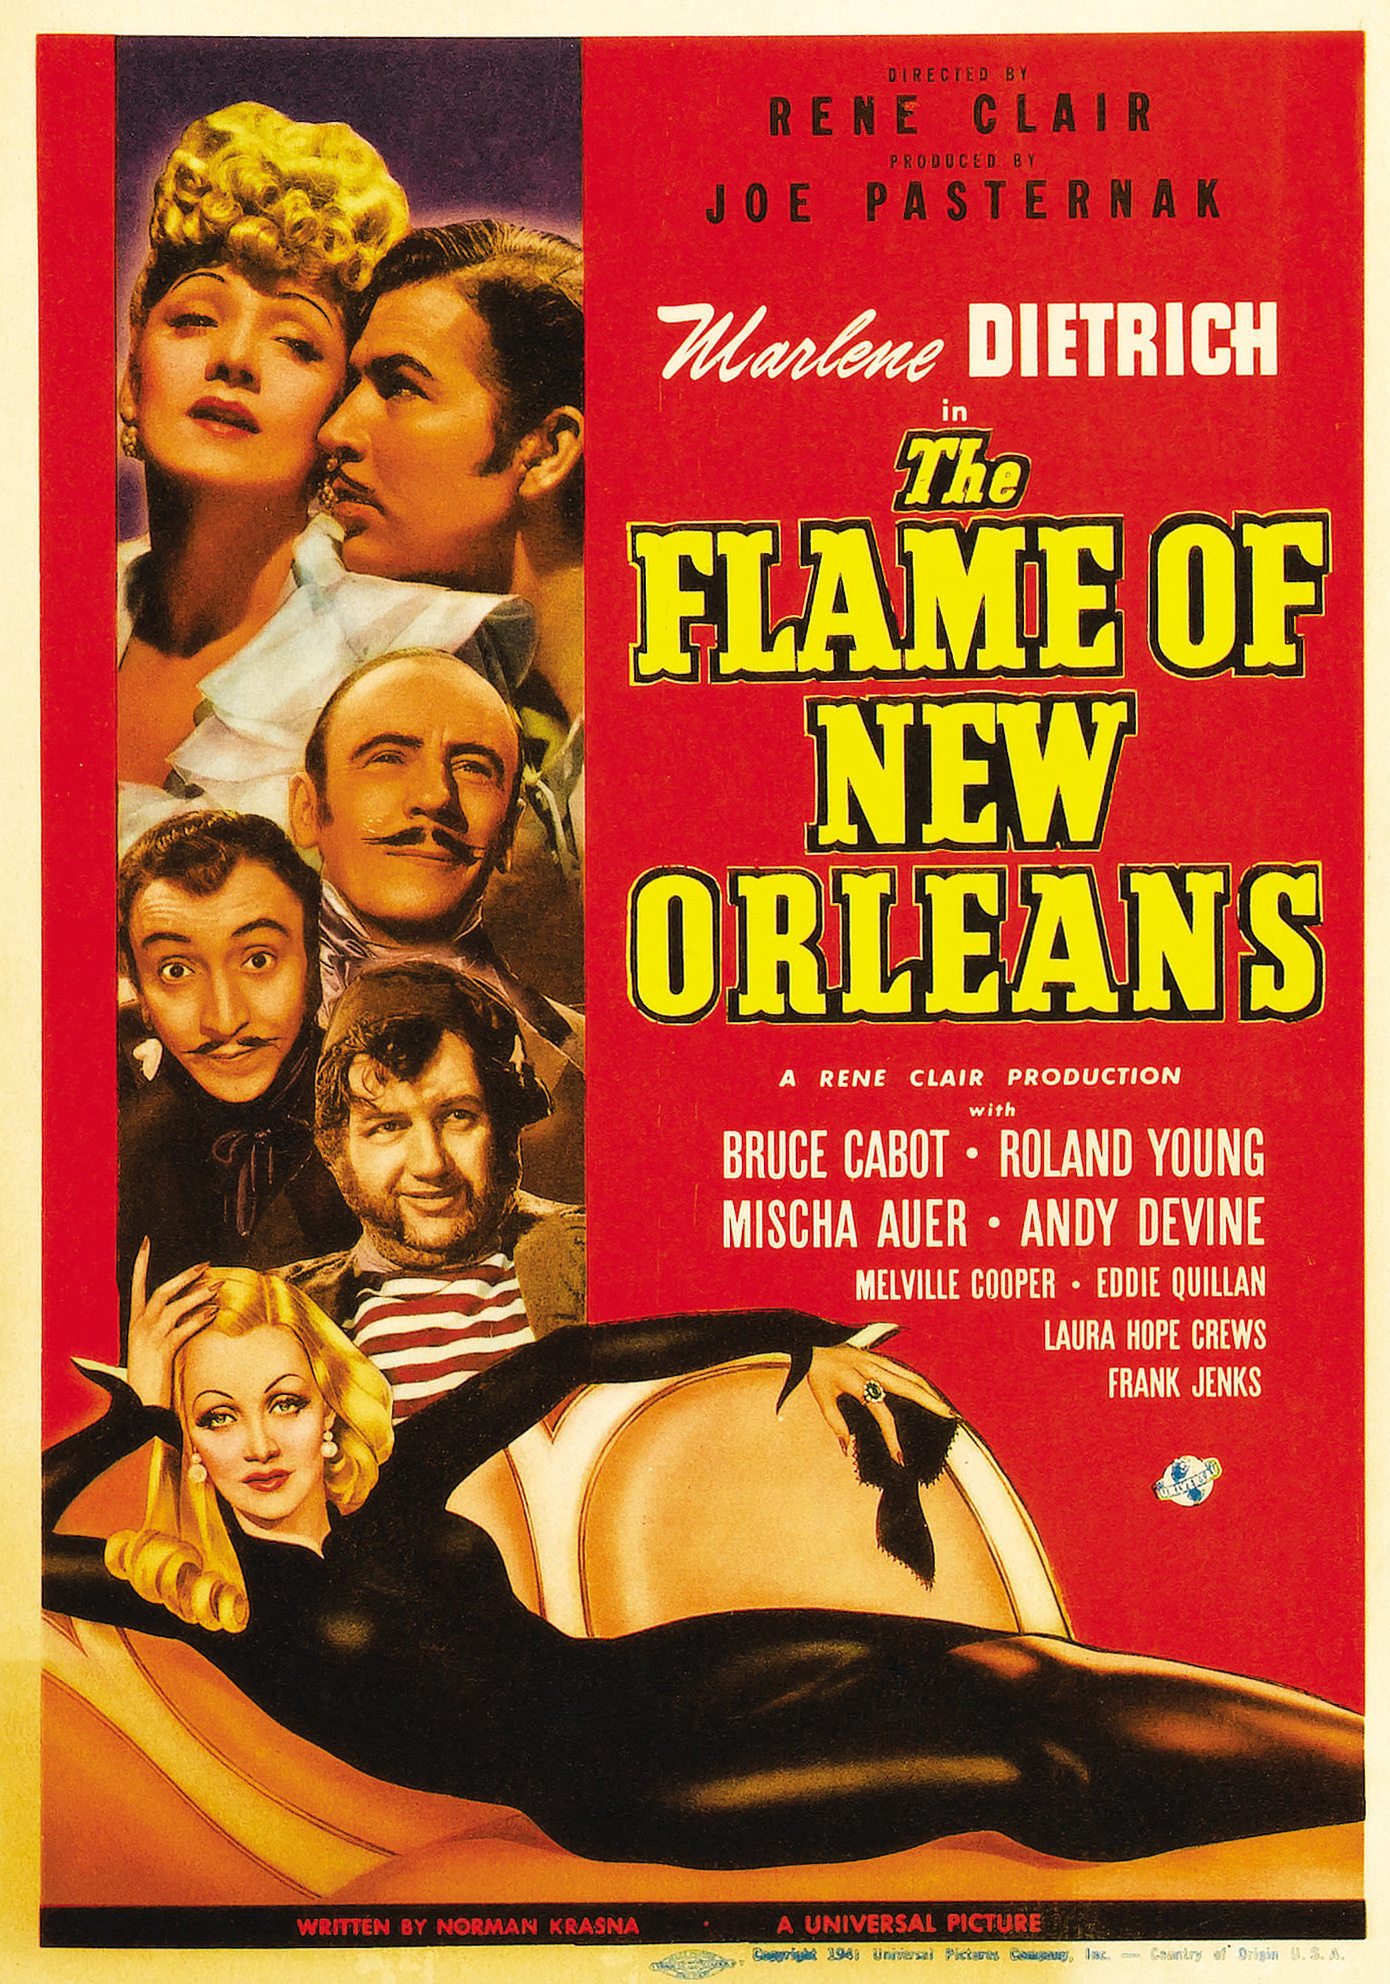 THE FLAME OF NEW ORLEANS (1941)